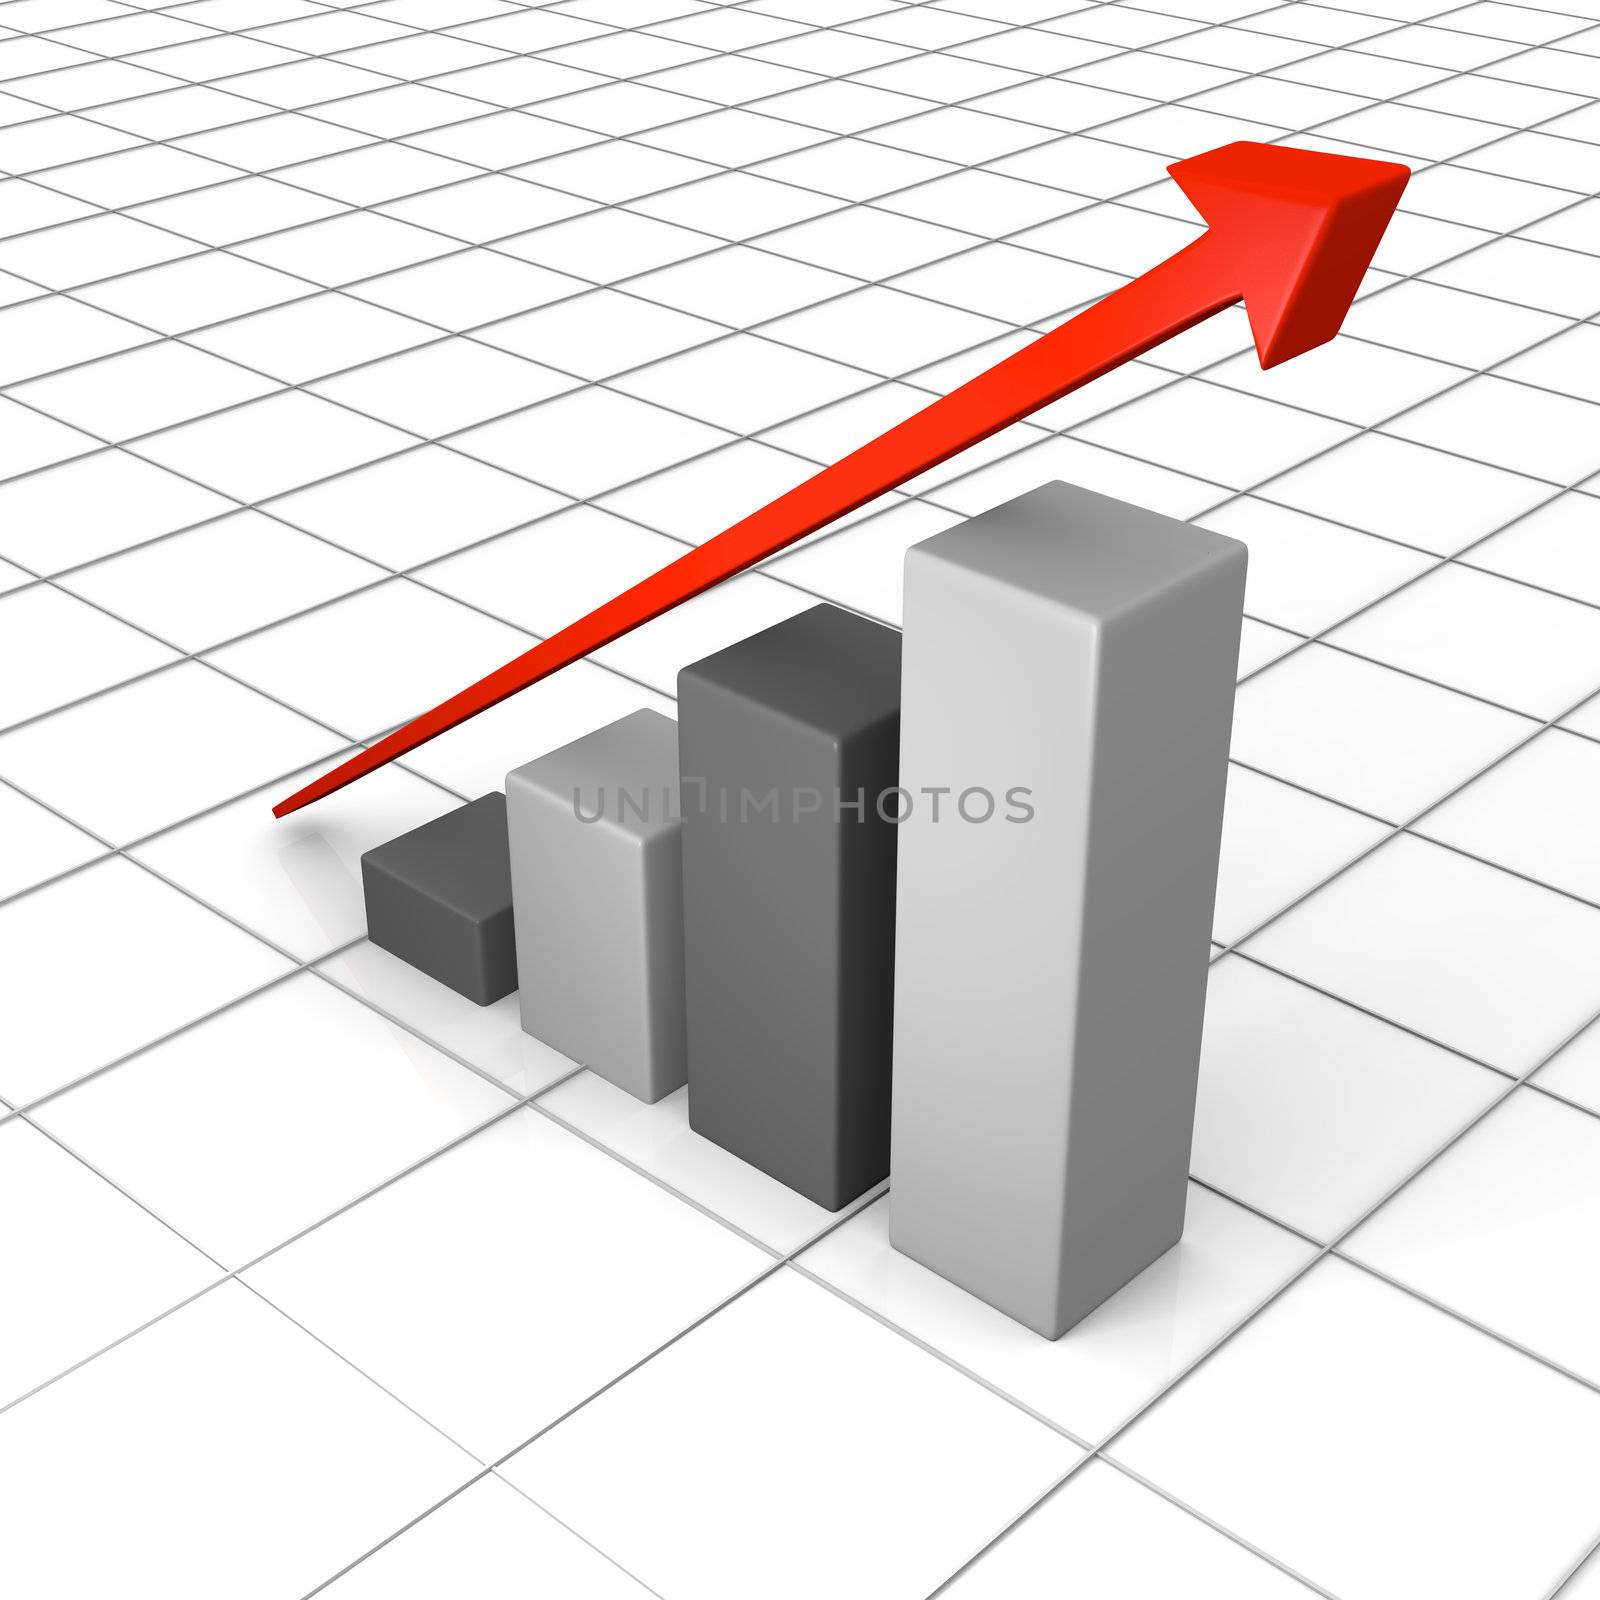 3D illustration of growth chart with linear red trend line